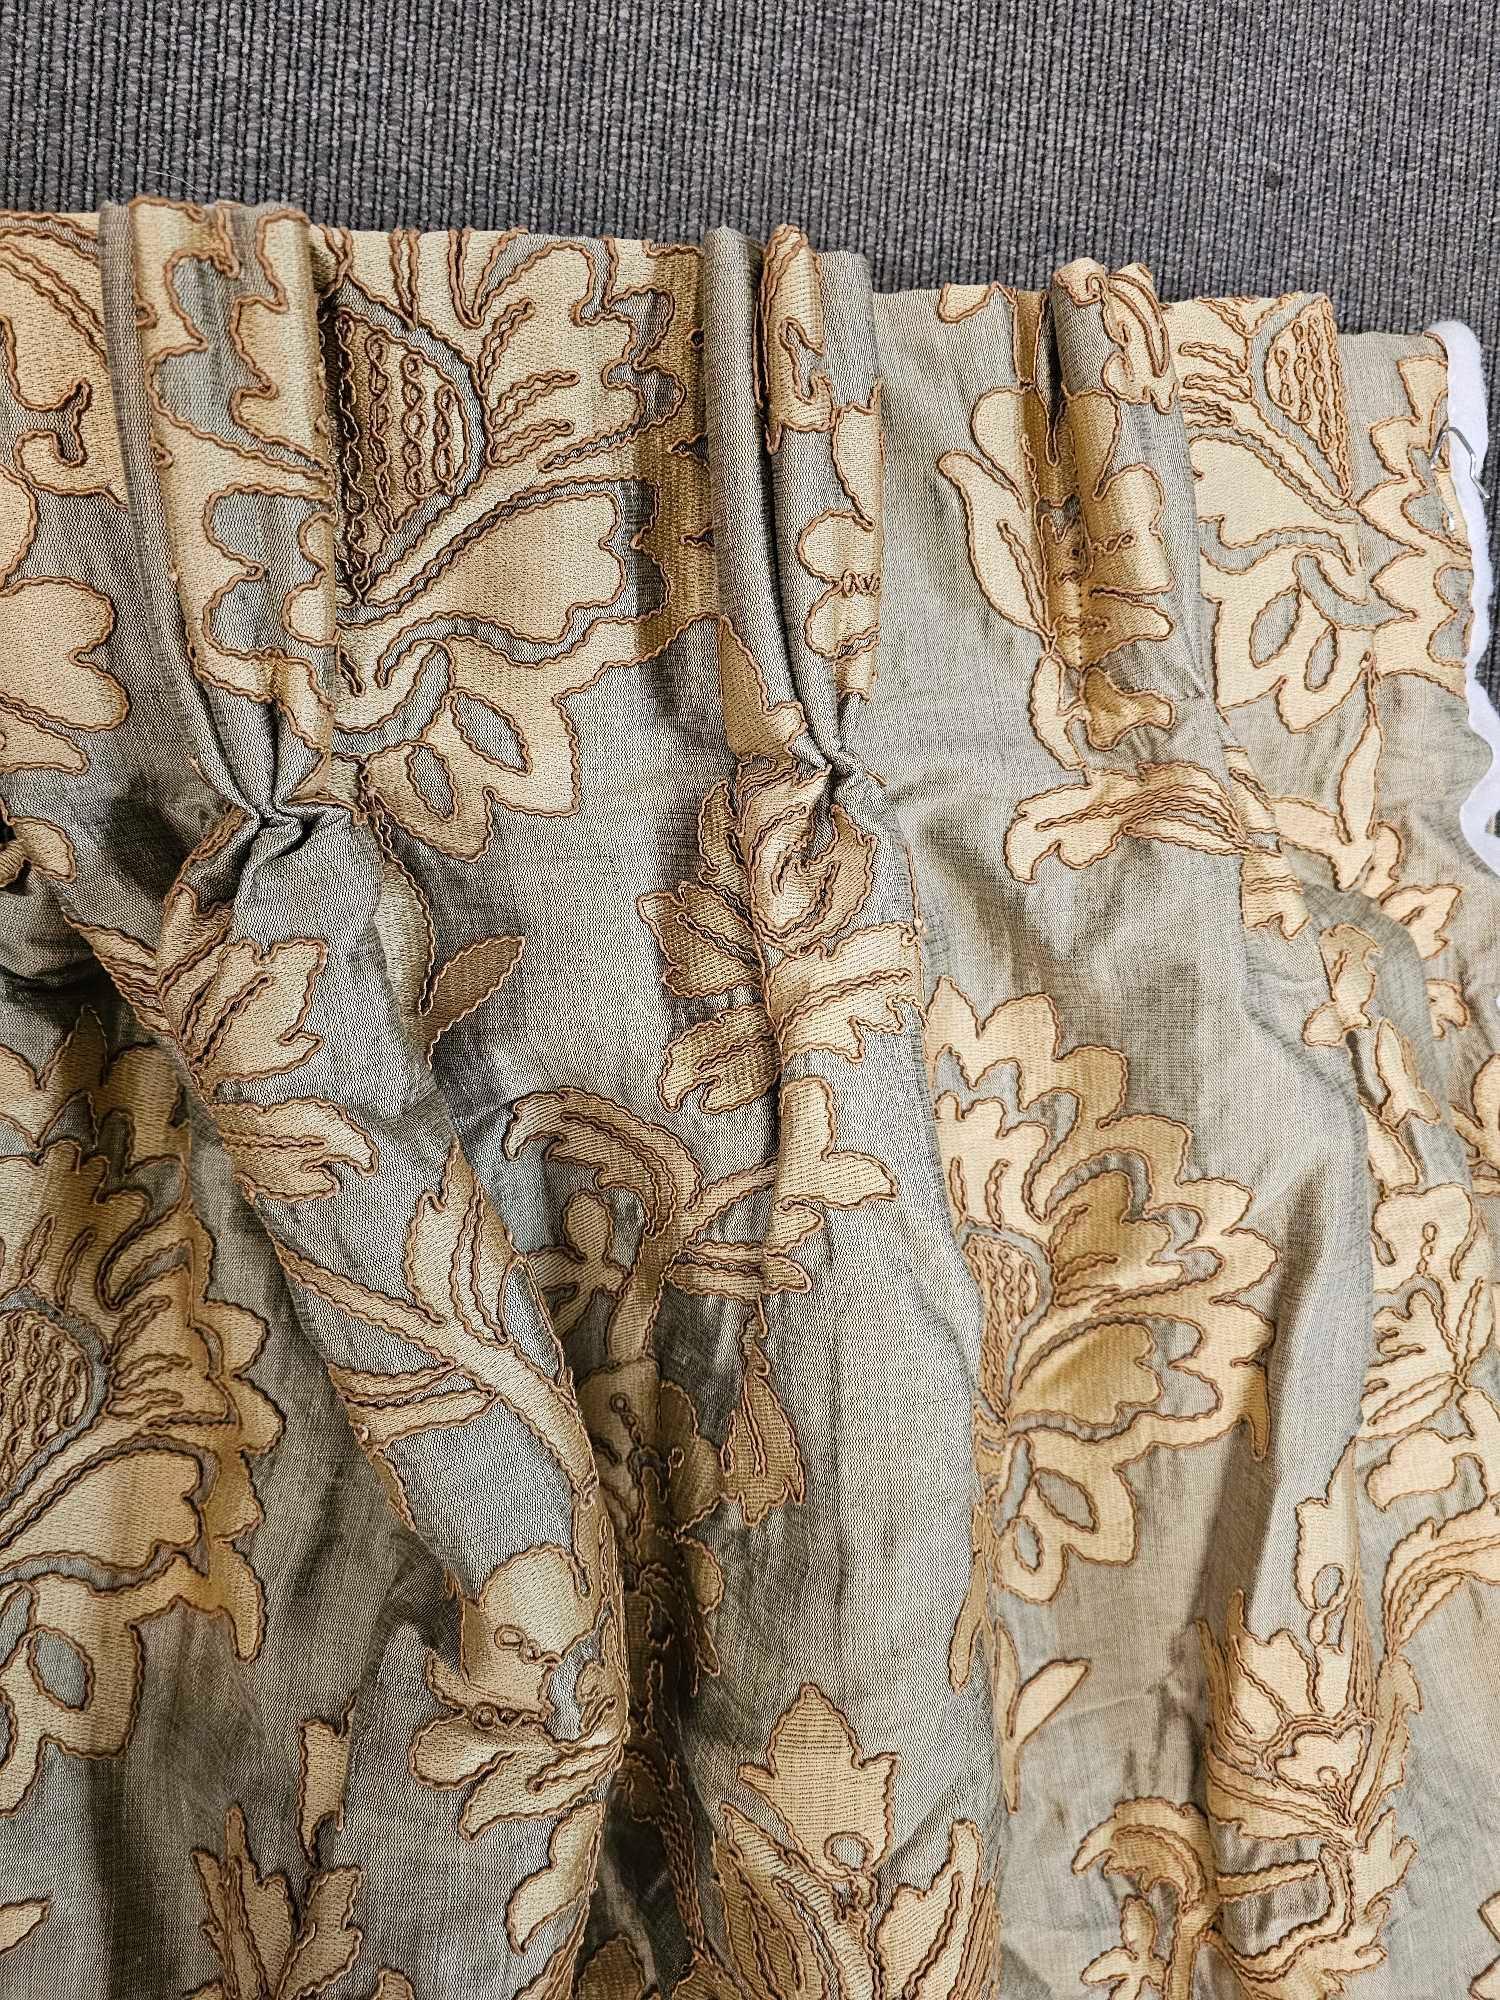 A Pair Of Drapes Silk Flower Pattern Tie Backs Size -cm 192 x 249 Ref Dorch 59 - Image 3 of 3